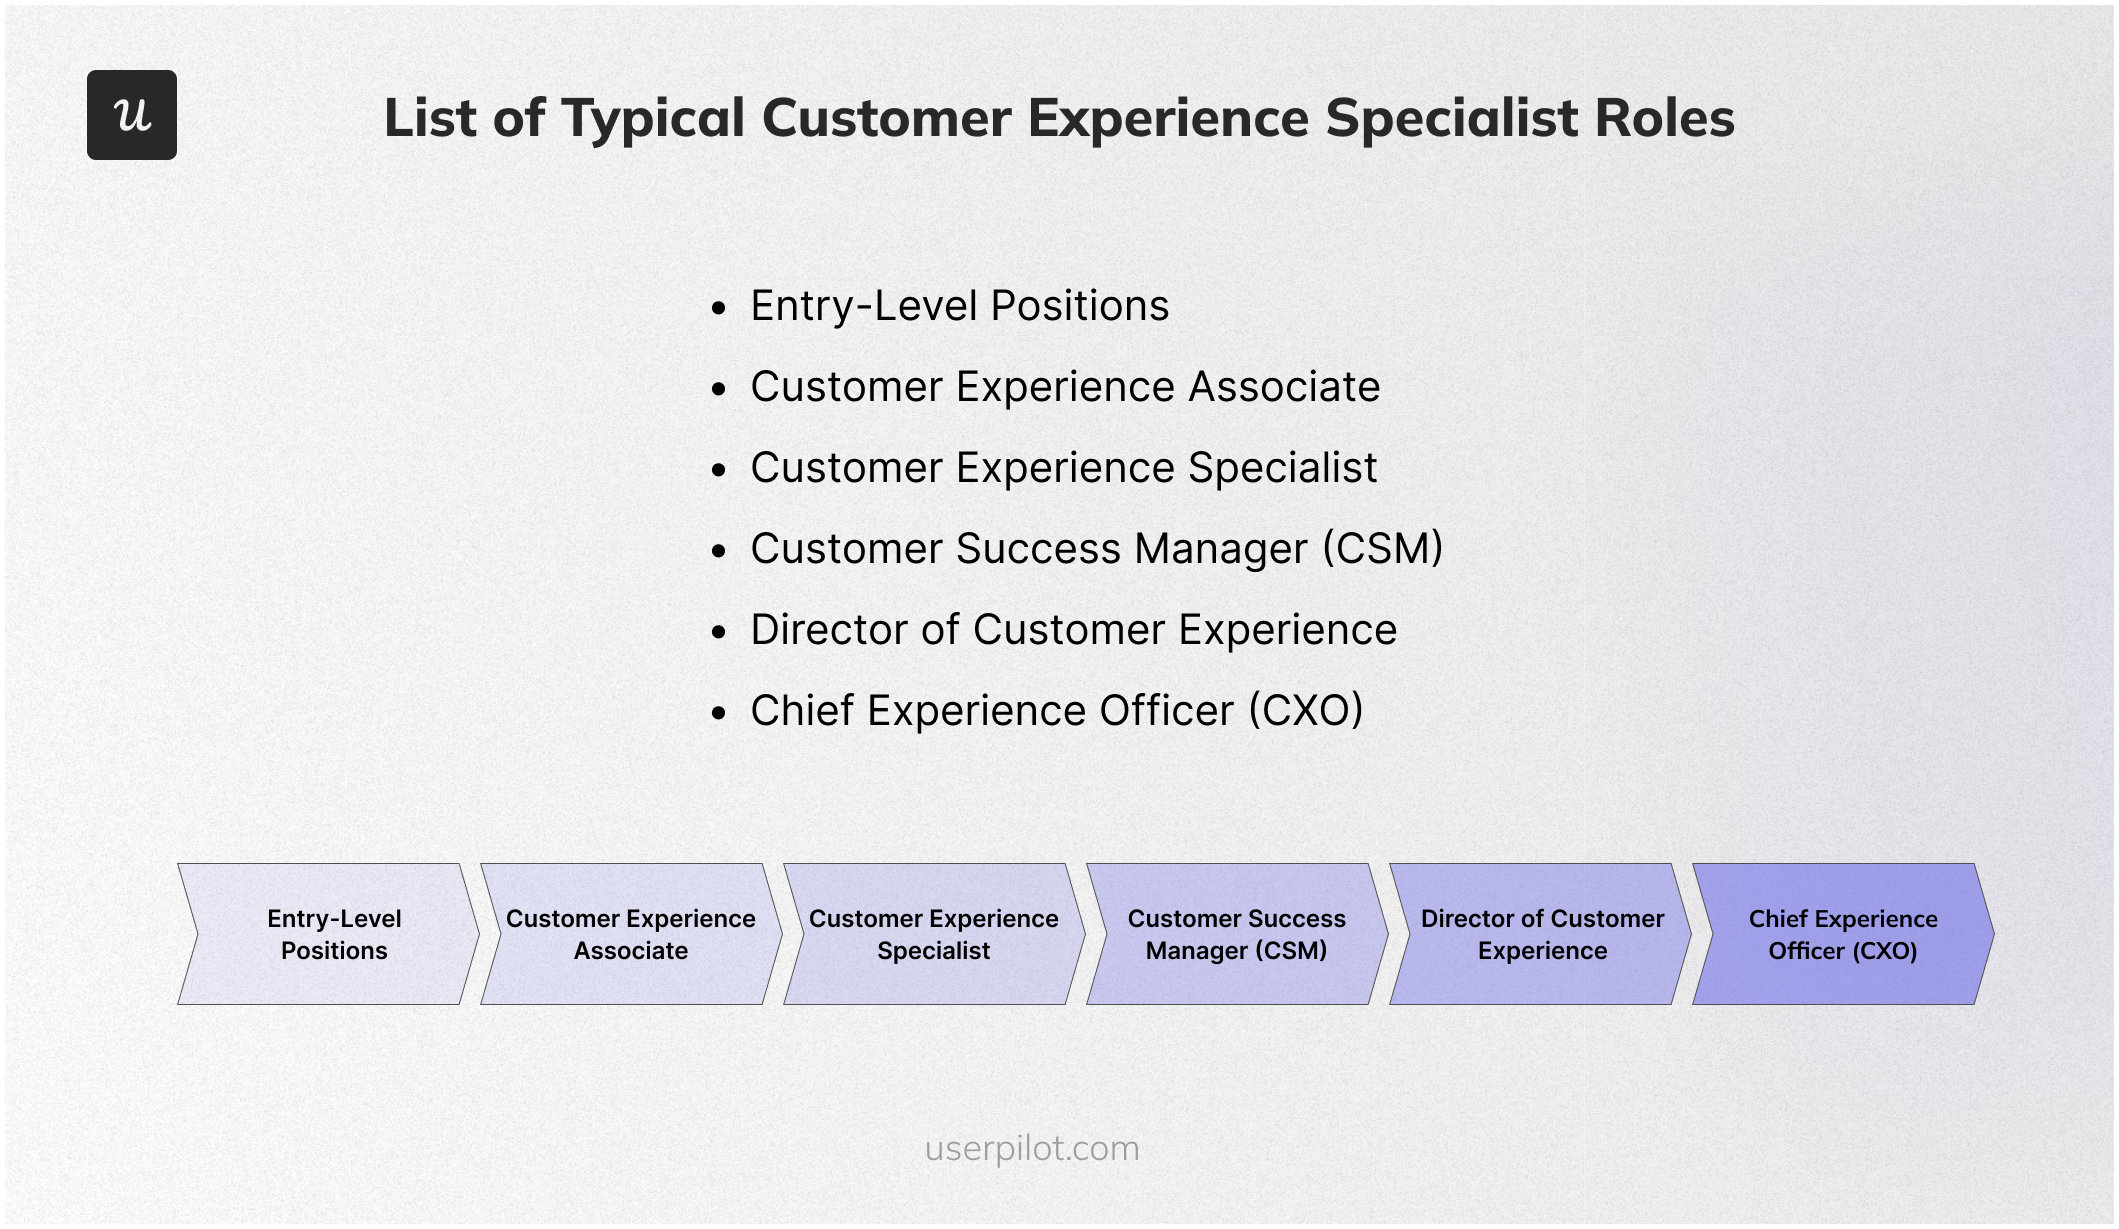 List of Typical Customer Experience Specialist Roles